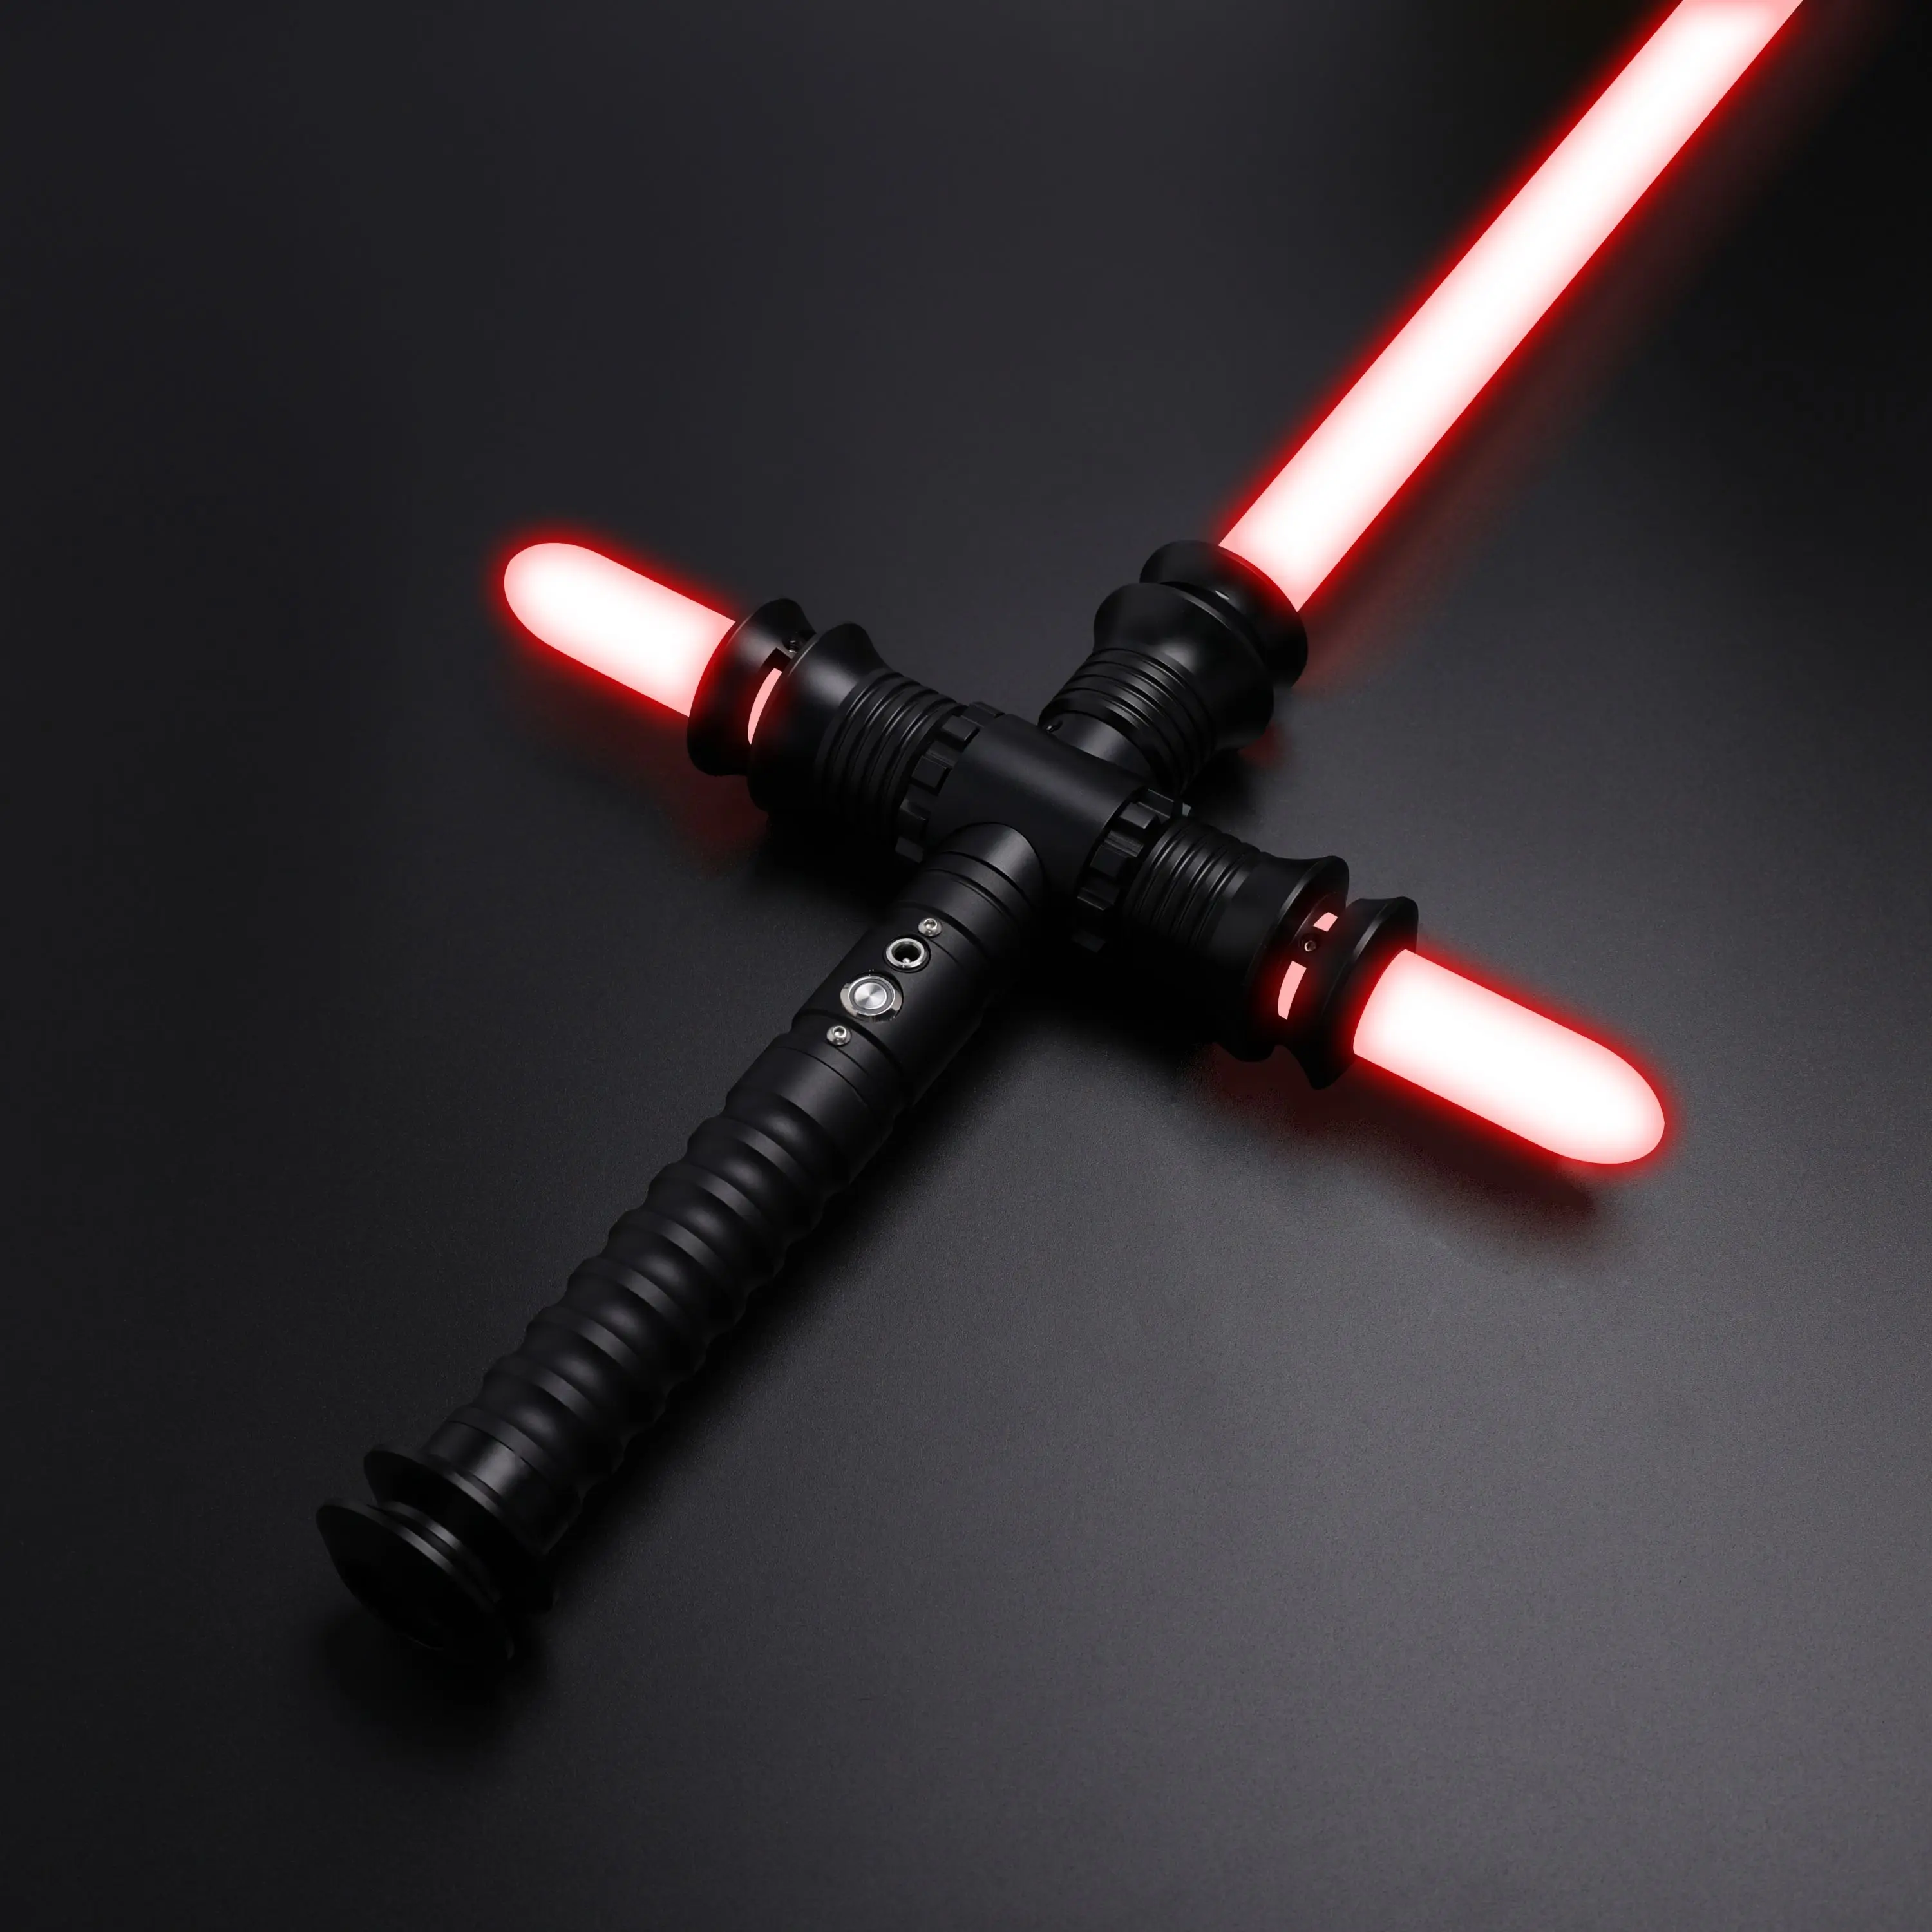 

SaberFeast New Cross Lightsaber Smoothswing Metal Hilt With Dueling Blade Blater FOC Lock Up Laser Sword Cosplay Toys-TSK-C01